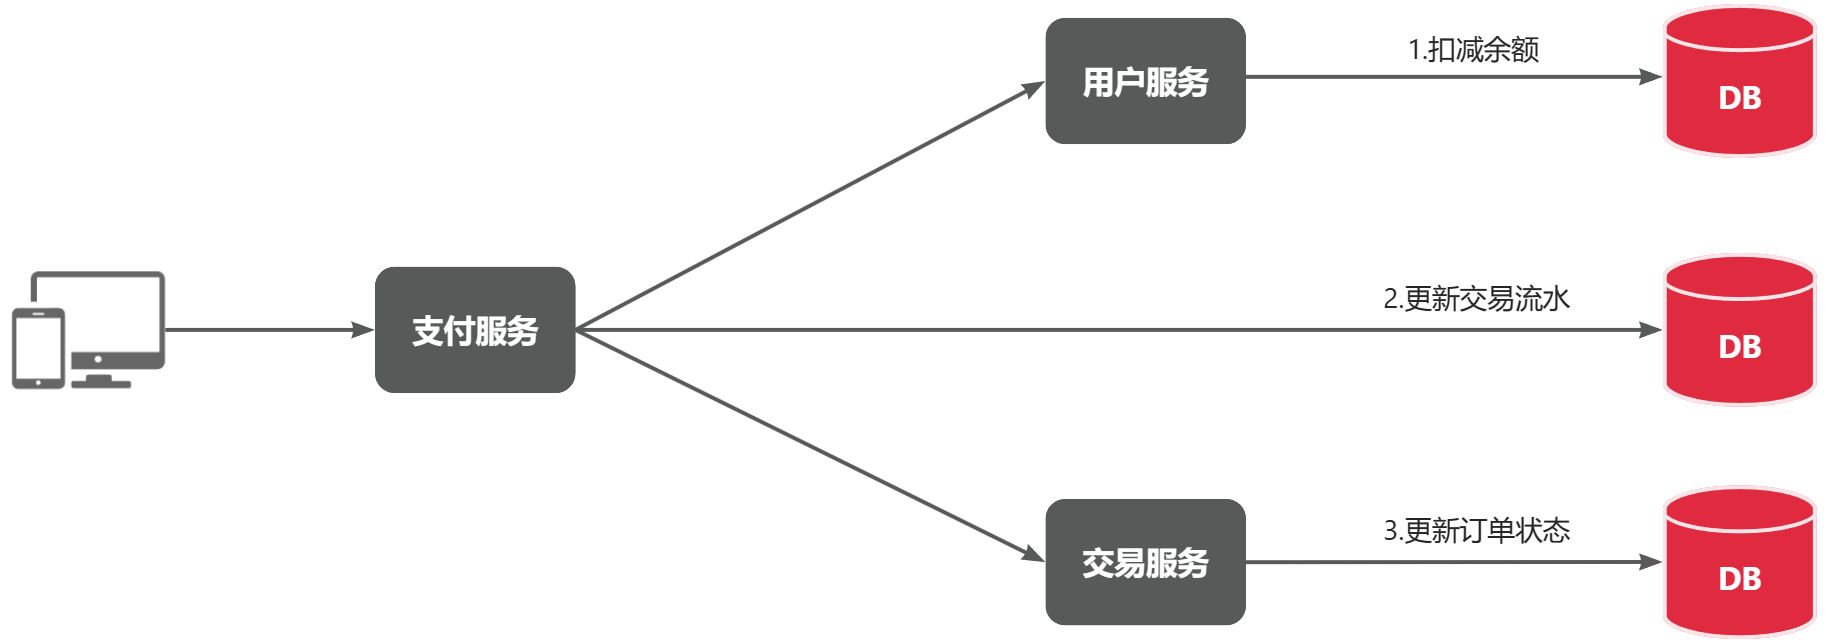 <span style='color:red;'>初</span><span style='color:red;'>识</span><span style='color:red;'>RabbitMq</span>